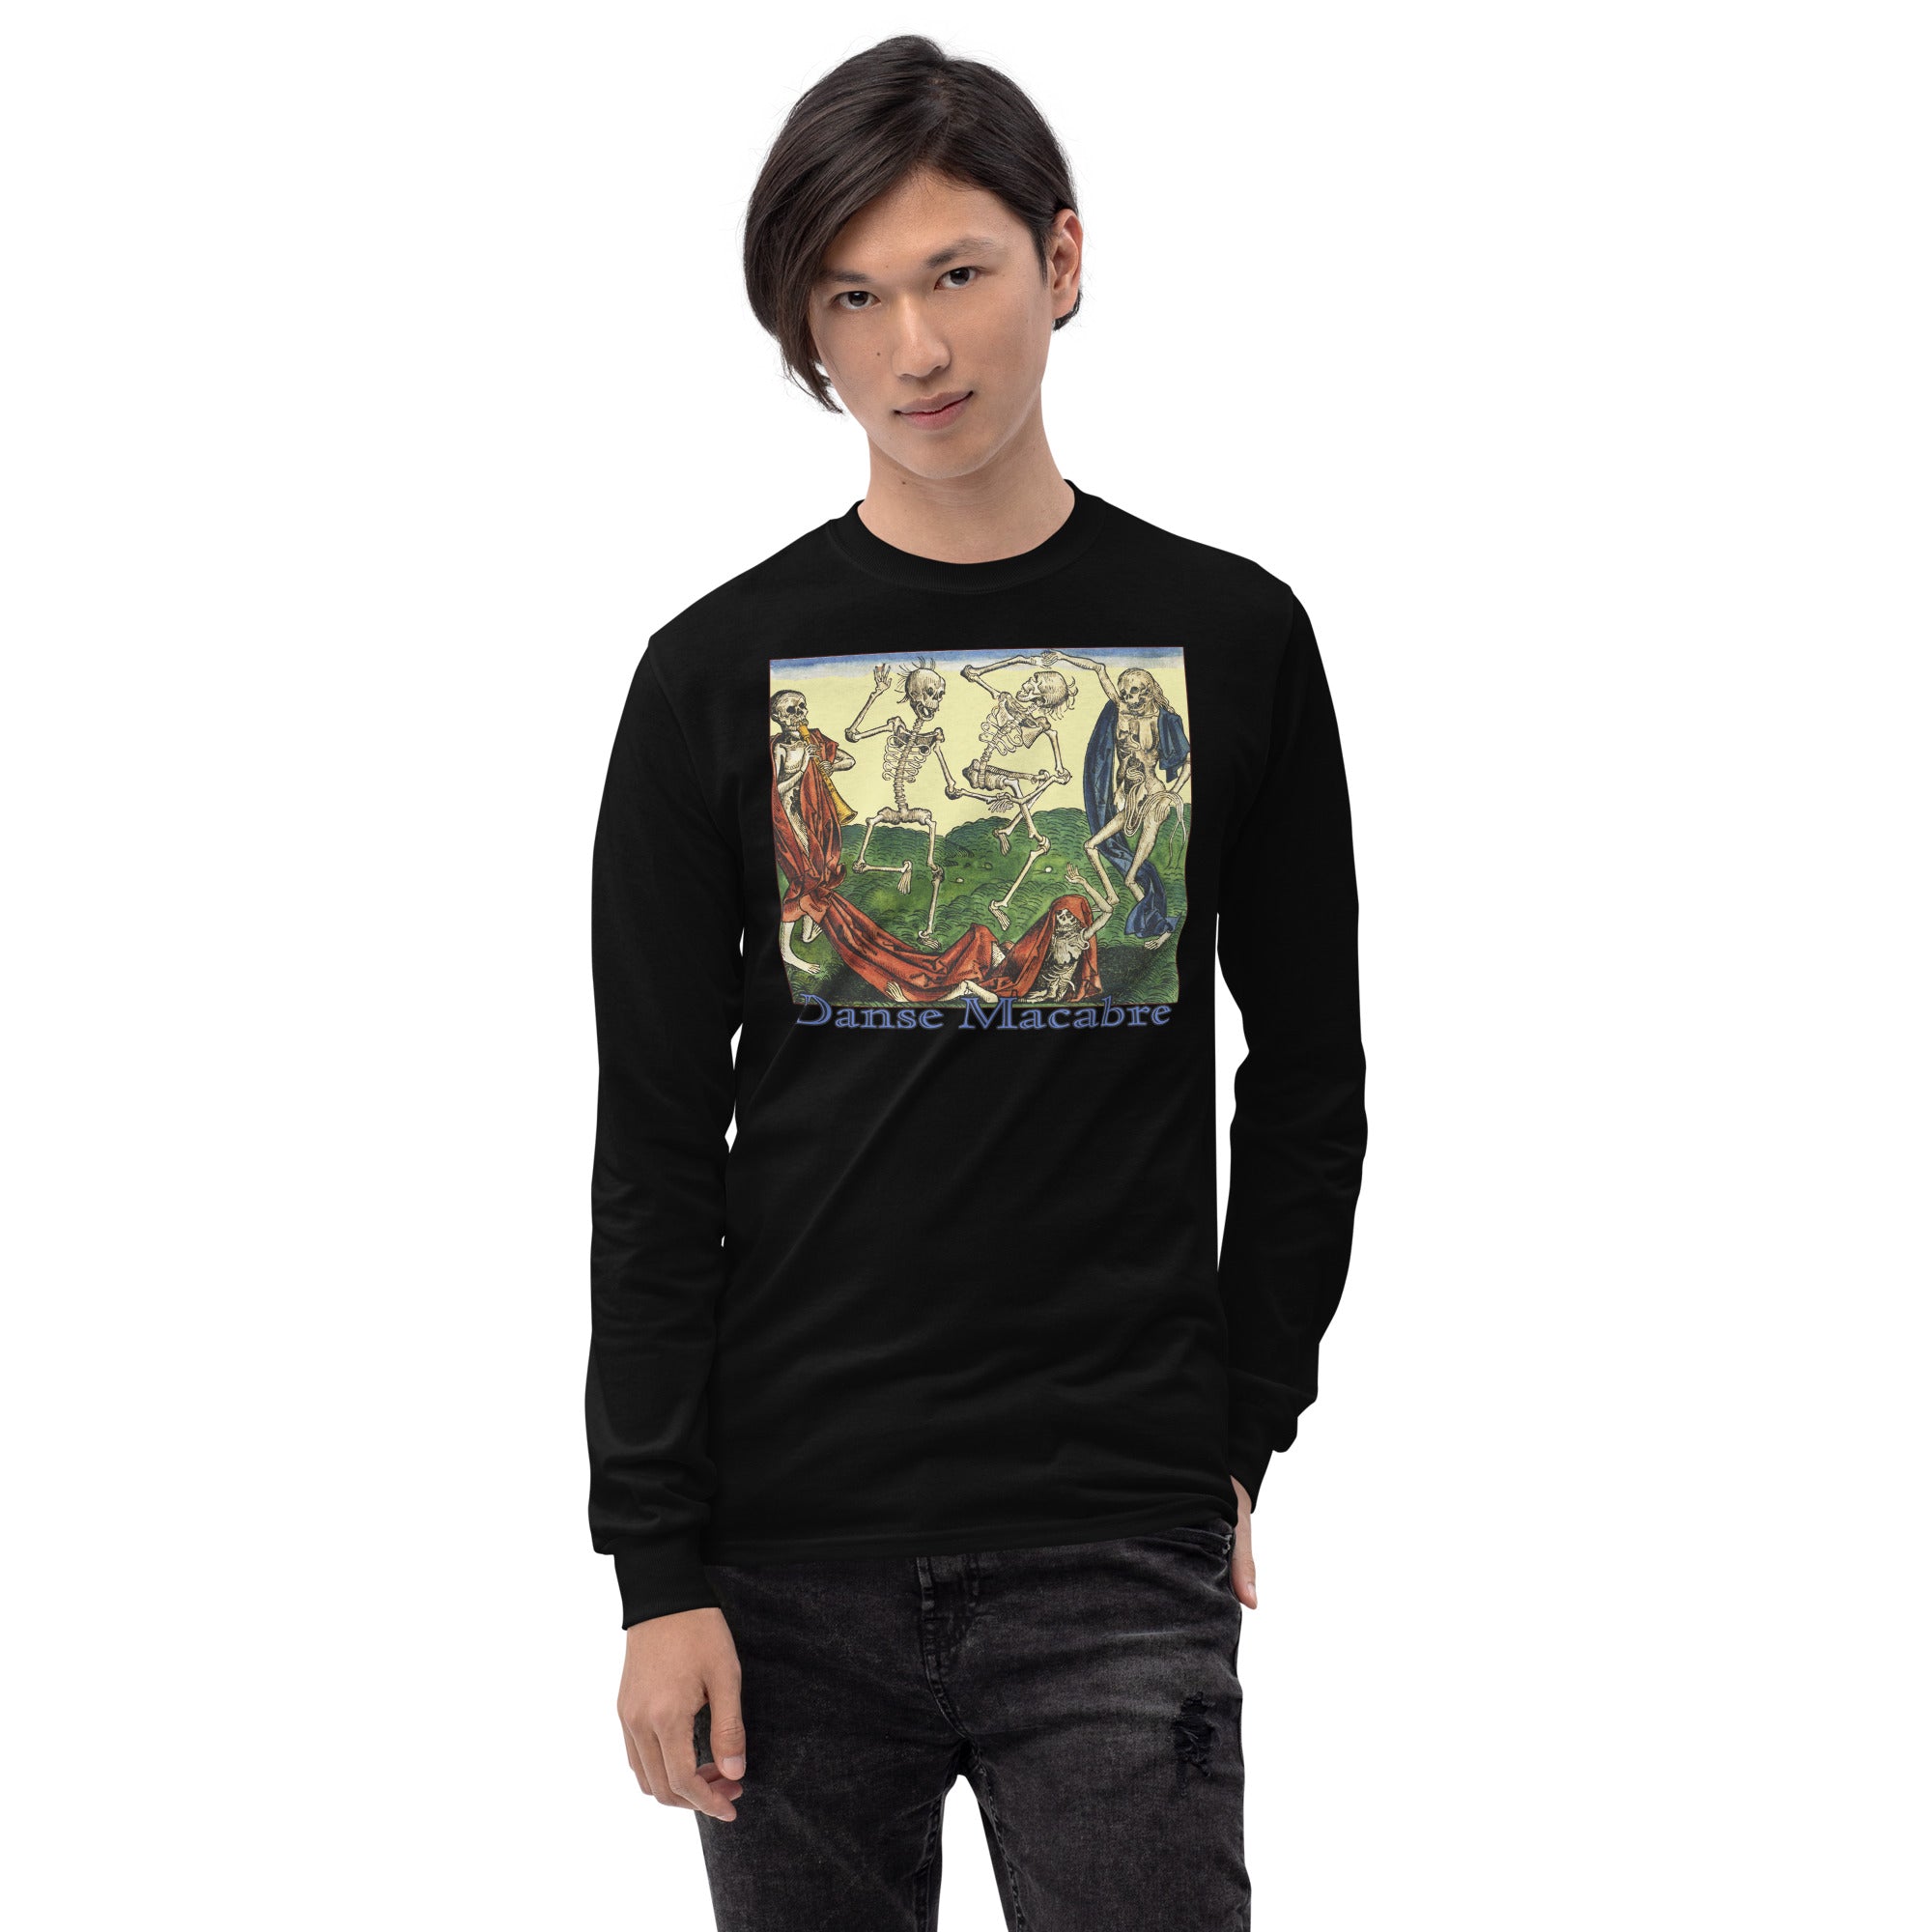 The Dance of Death - Dance Macabre Skeletons Long Sleeve Shirt - Edge of Life Designs